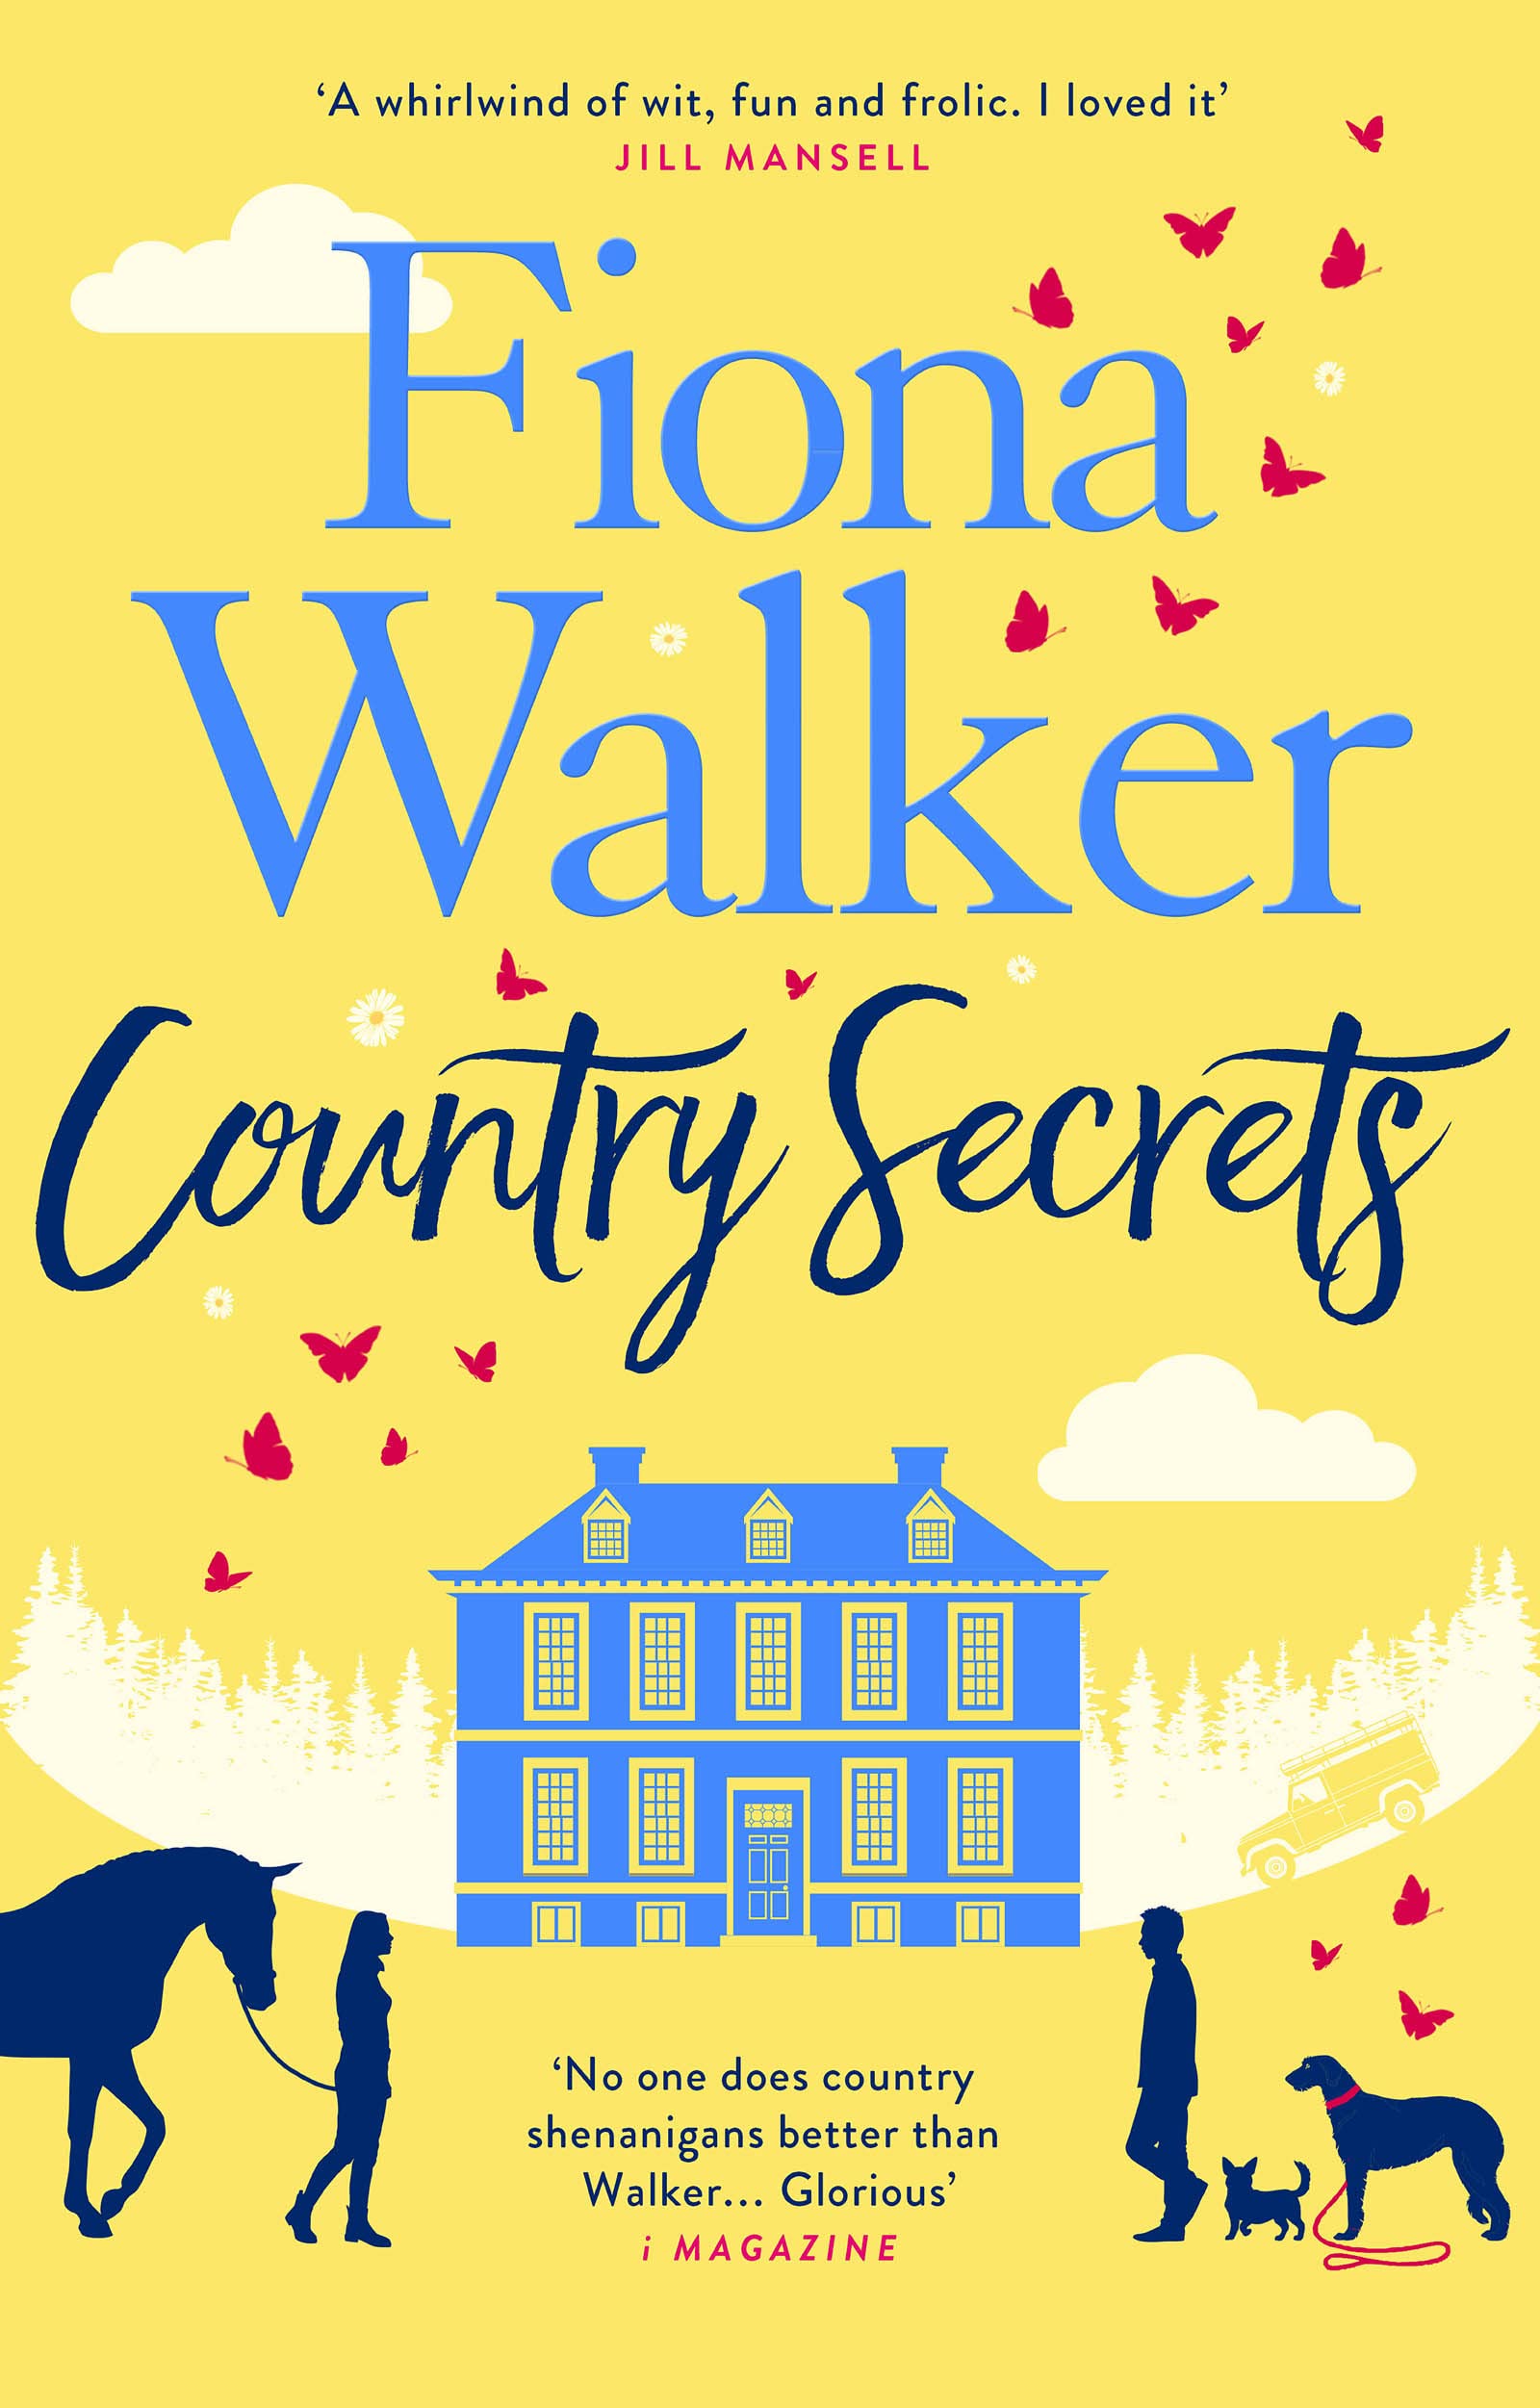 Country_secrets_book_cover